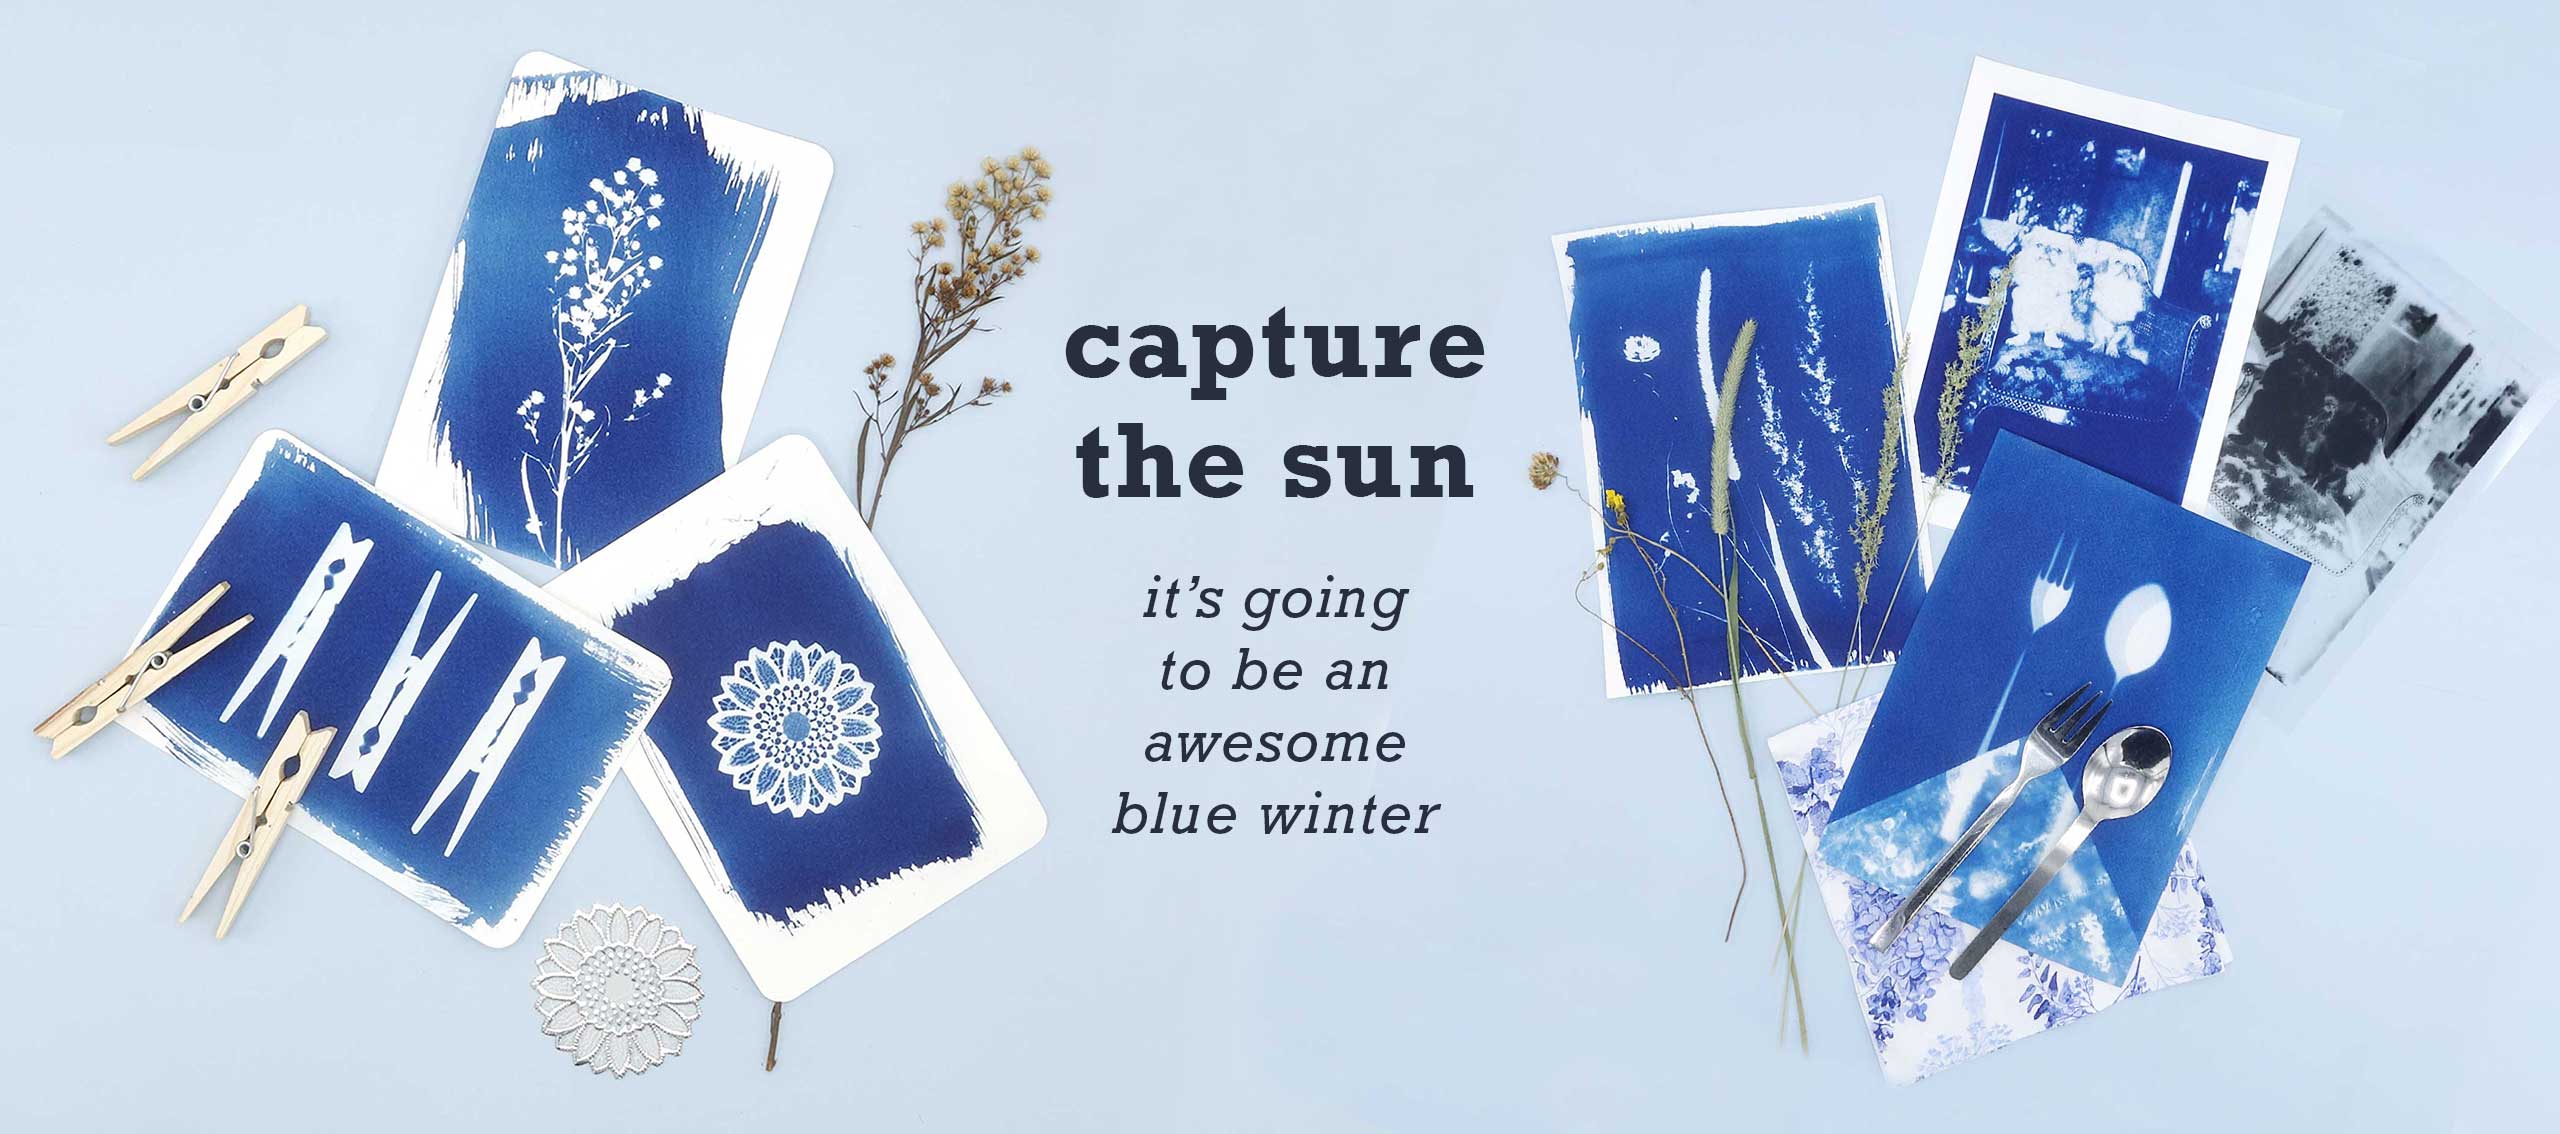 Capture the sun. it's going to be an awesome blue summer.